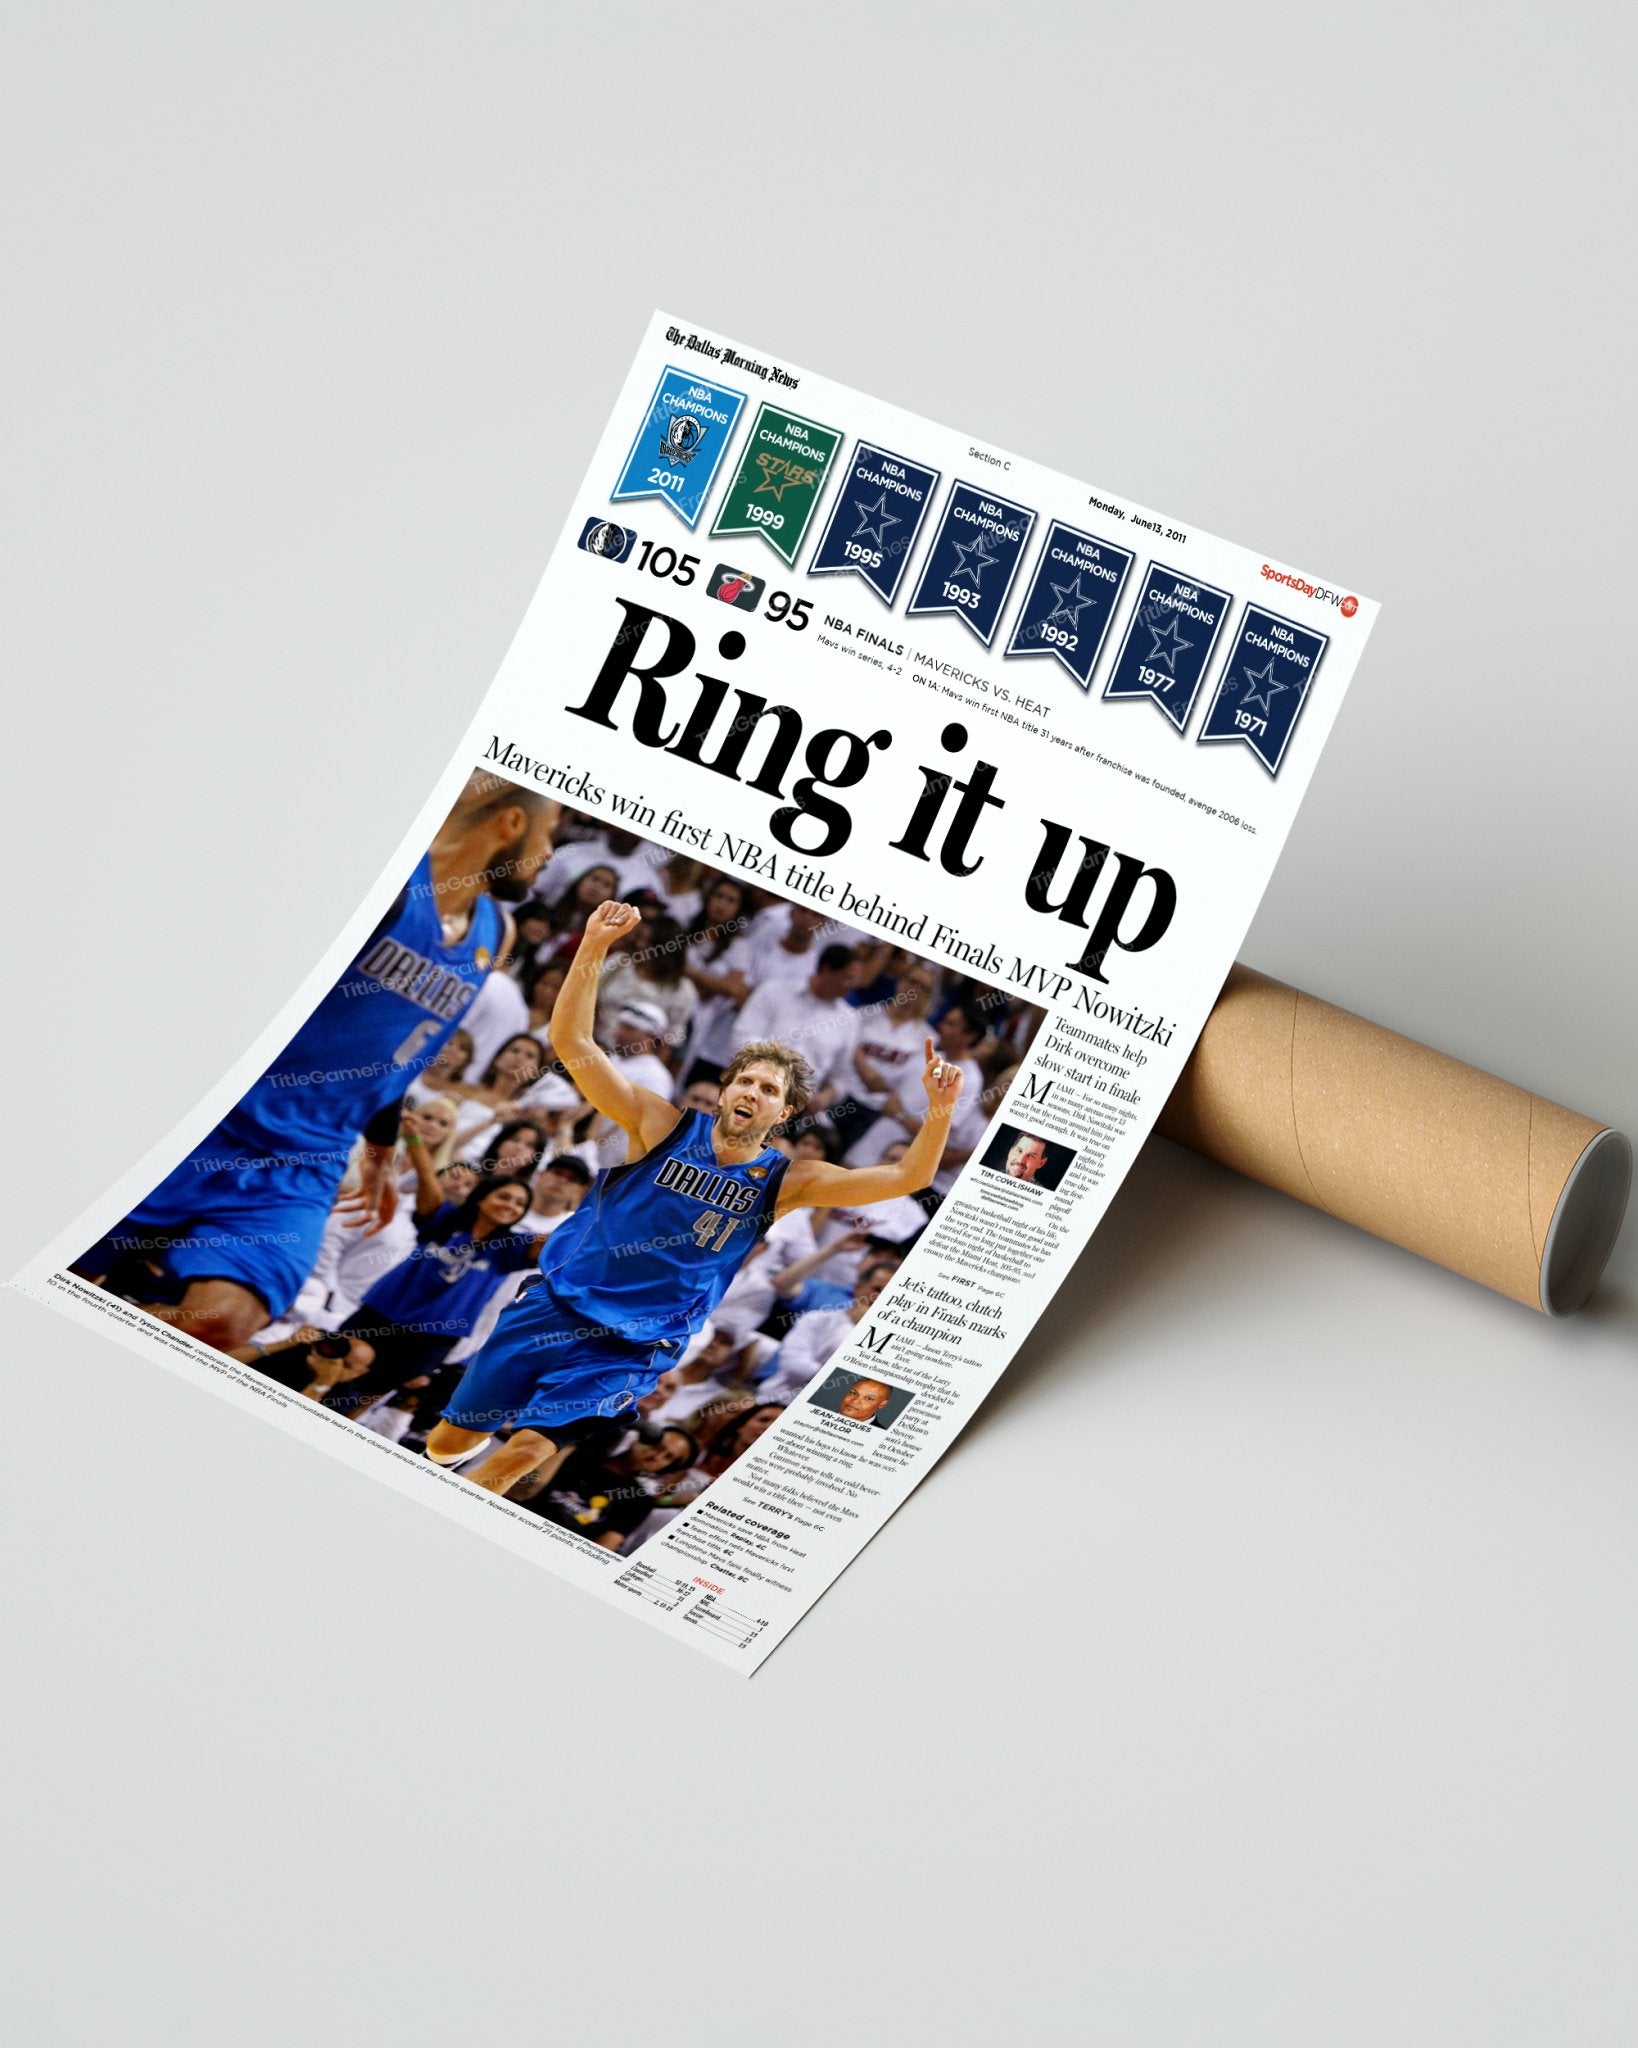 2011 Dallas Mavericks NBA Champions 'Ring it up' Framed Front Page Newspaper - Title Game Frames